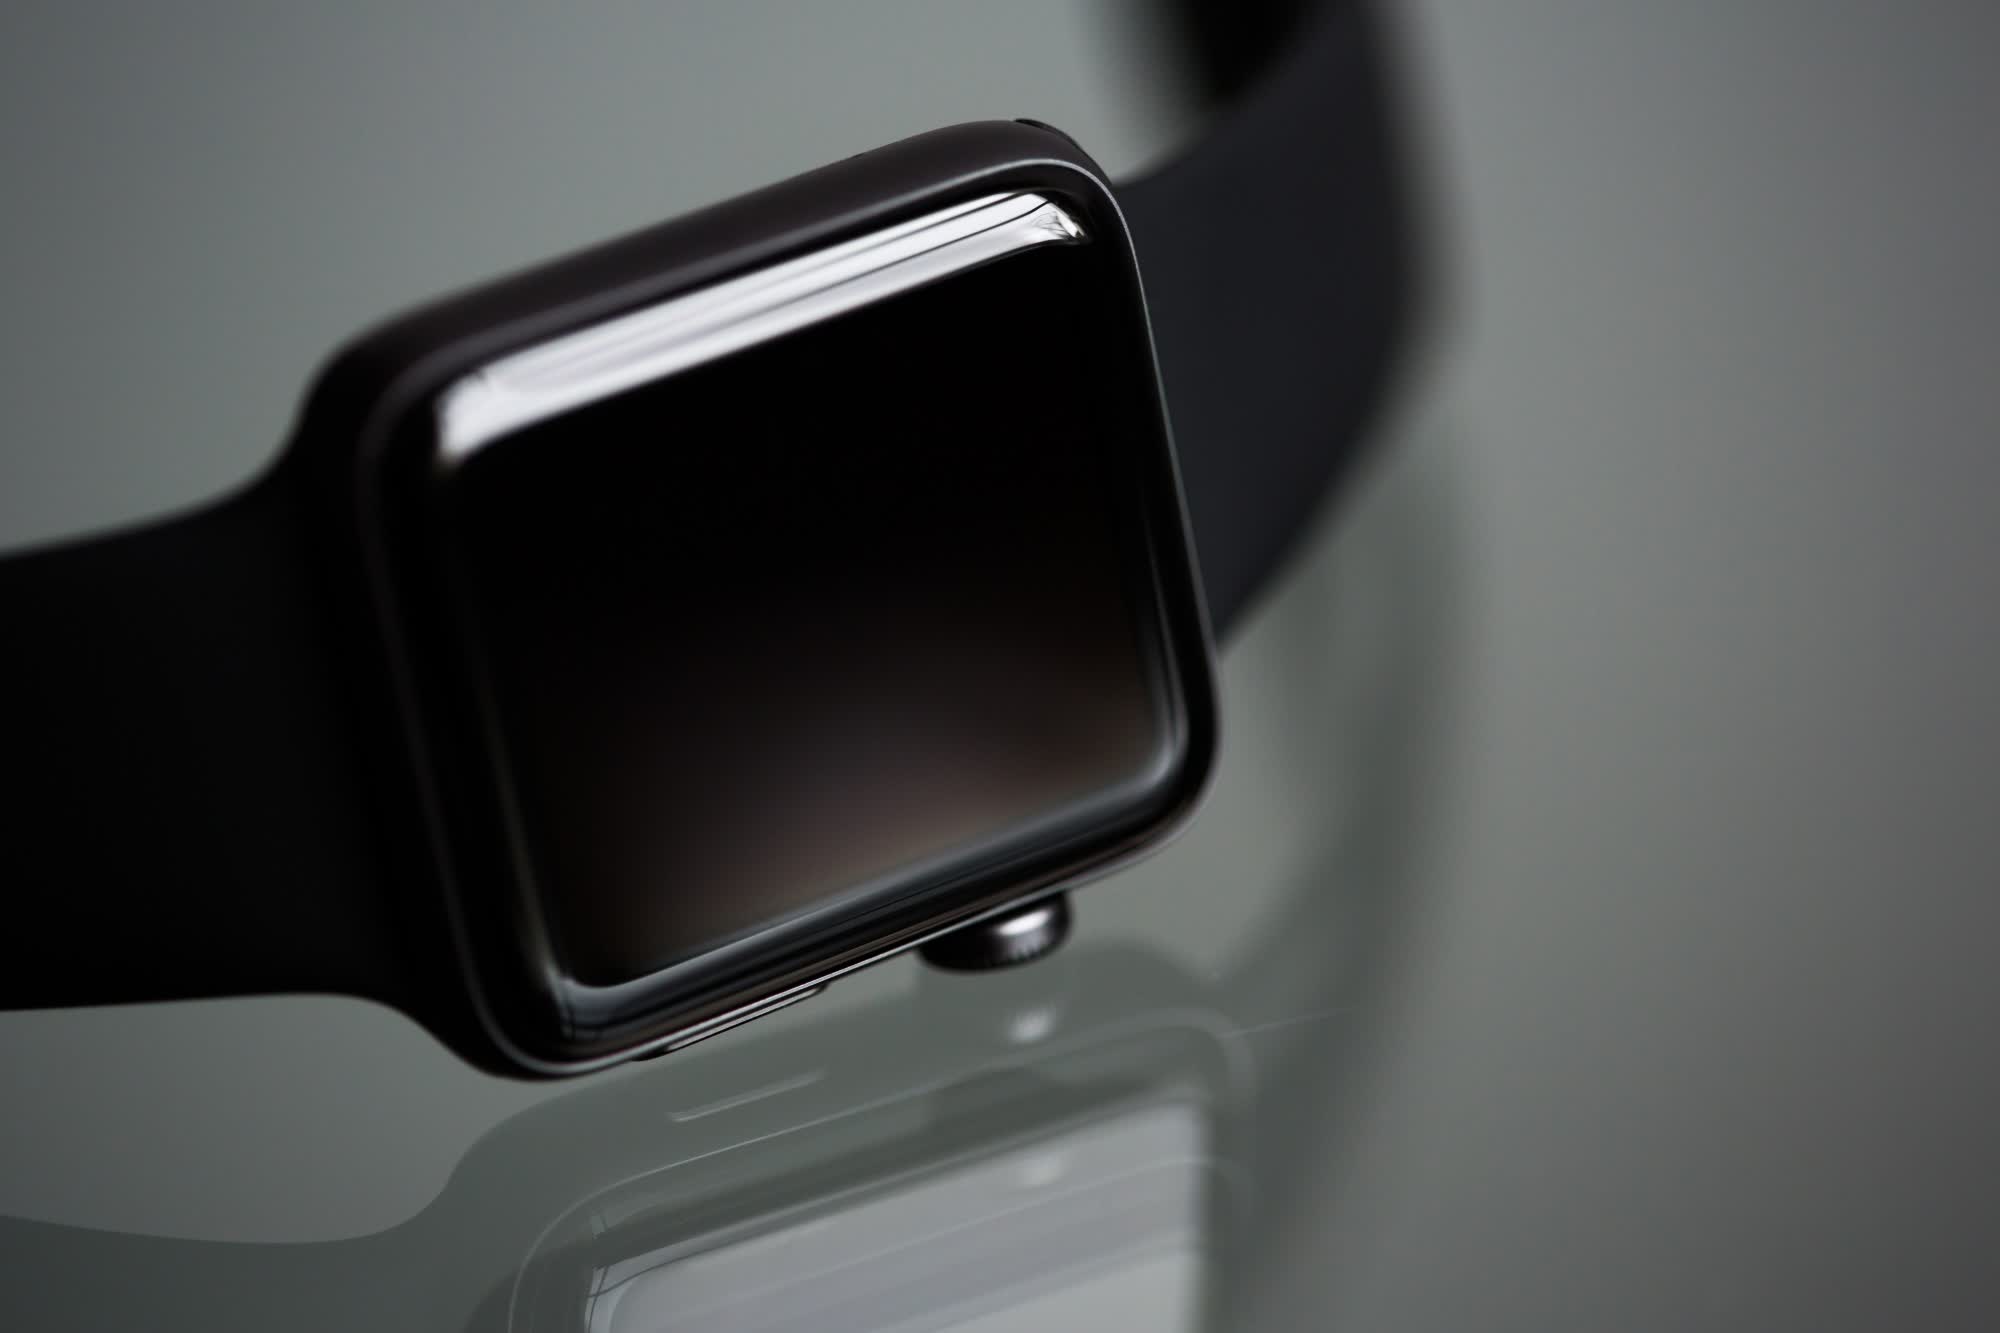 Apple Watch is likely getting a major overhaul for its 10th anniversary